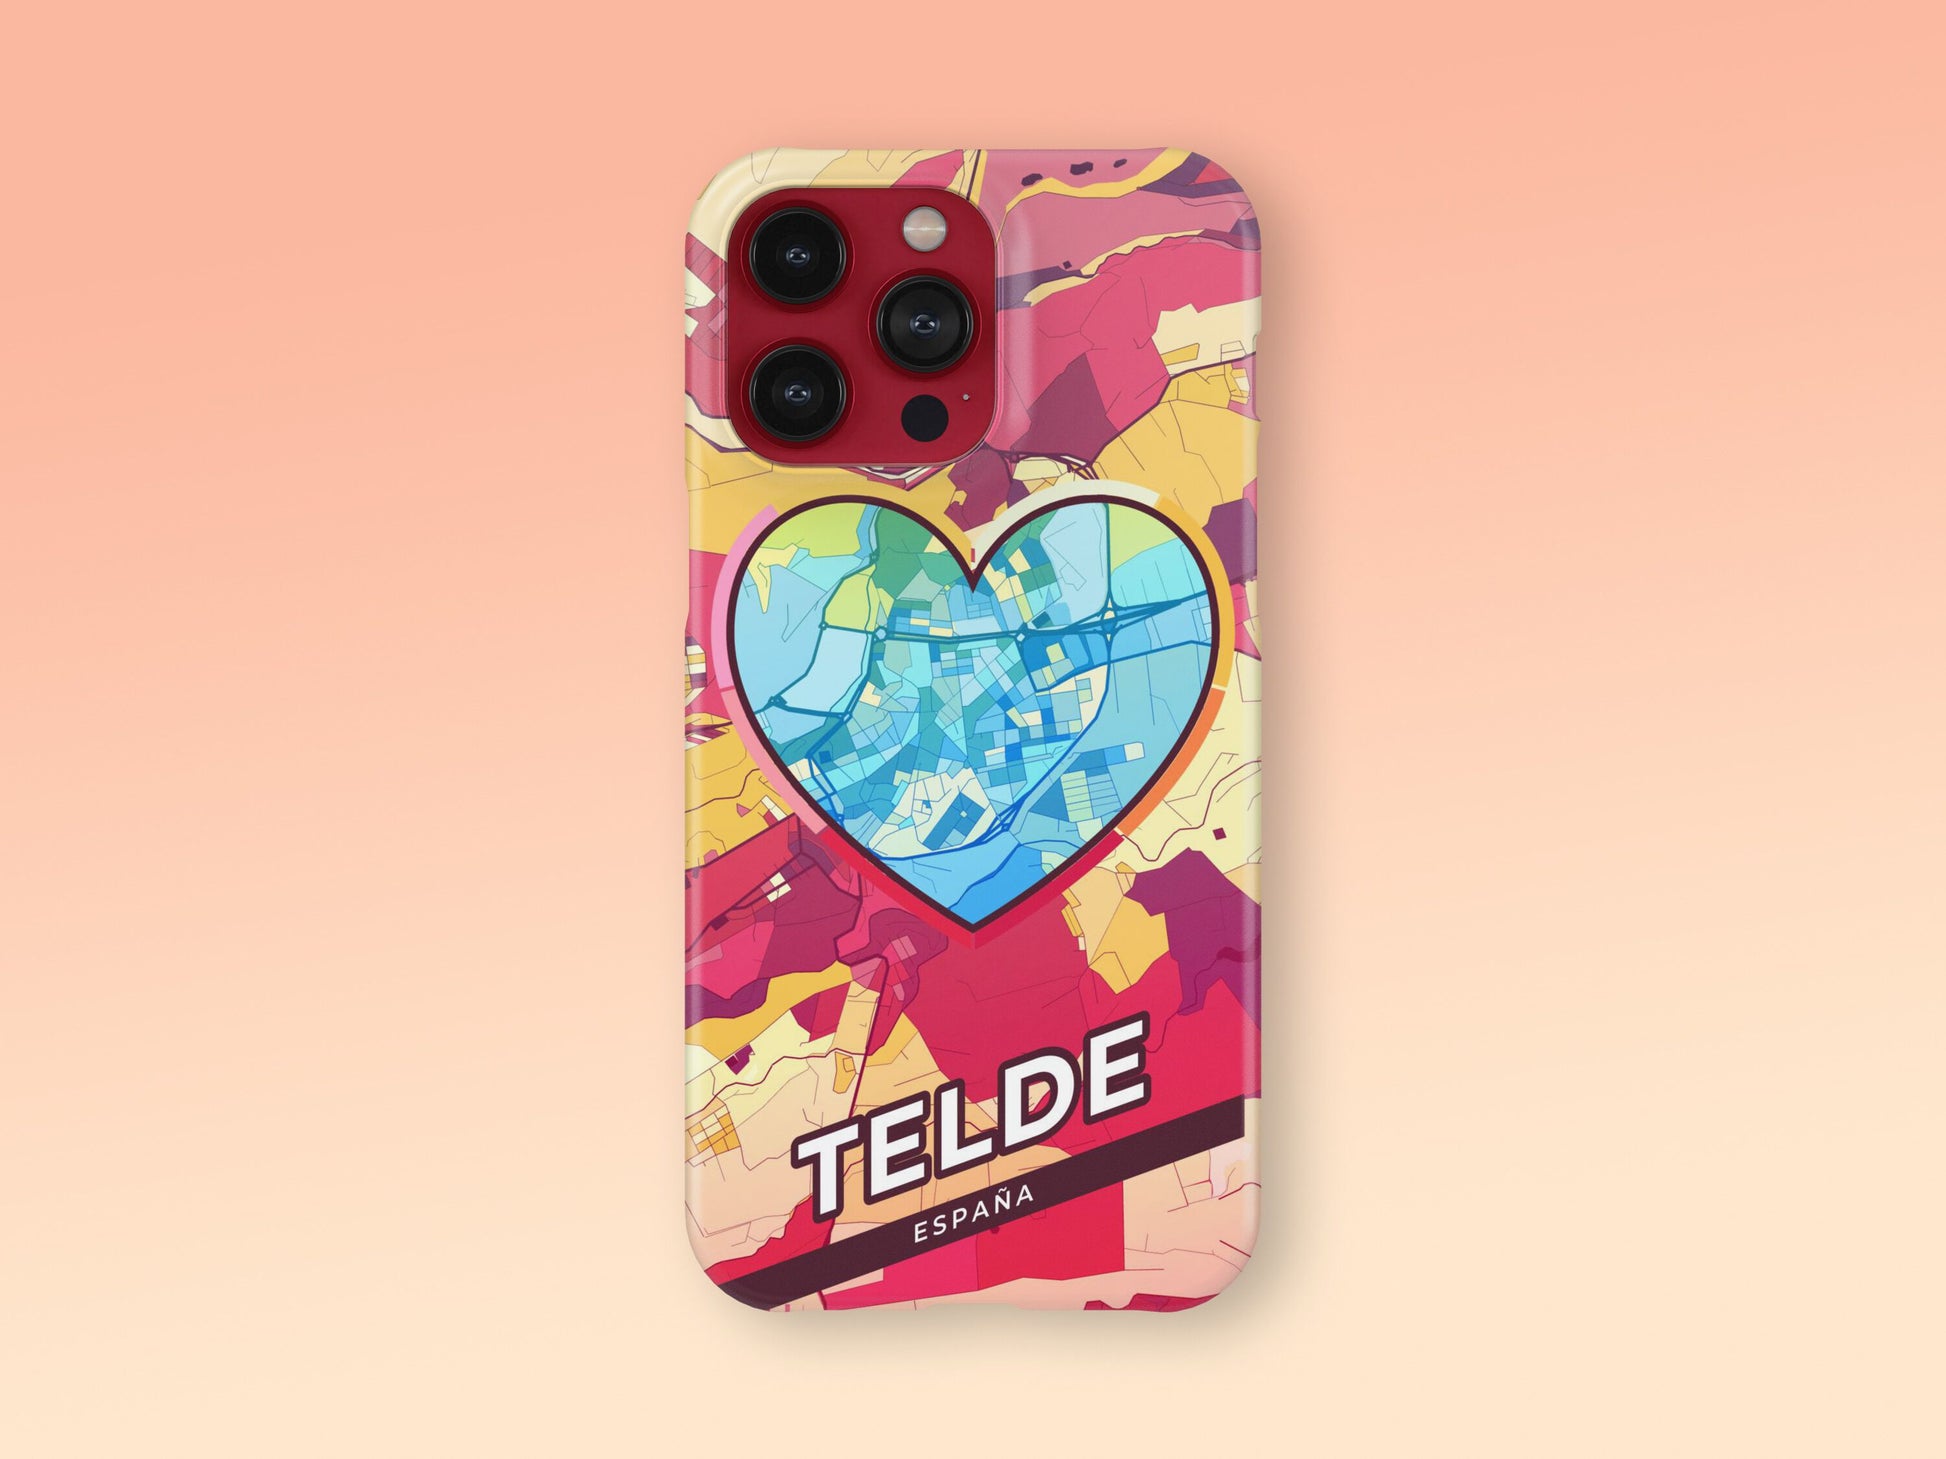 Telde Spain slim phone case with colorful icon 2